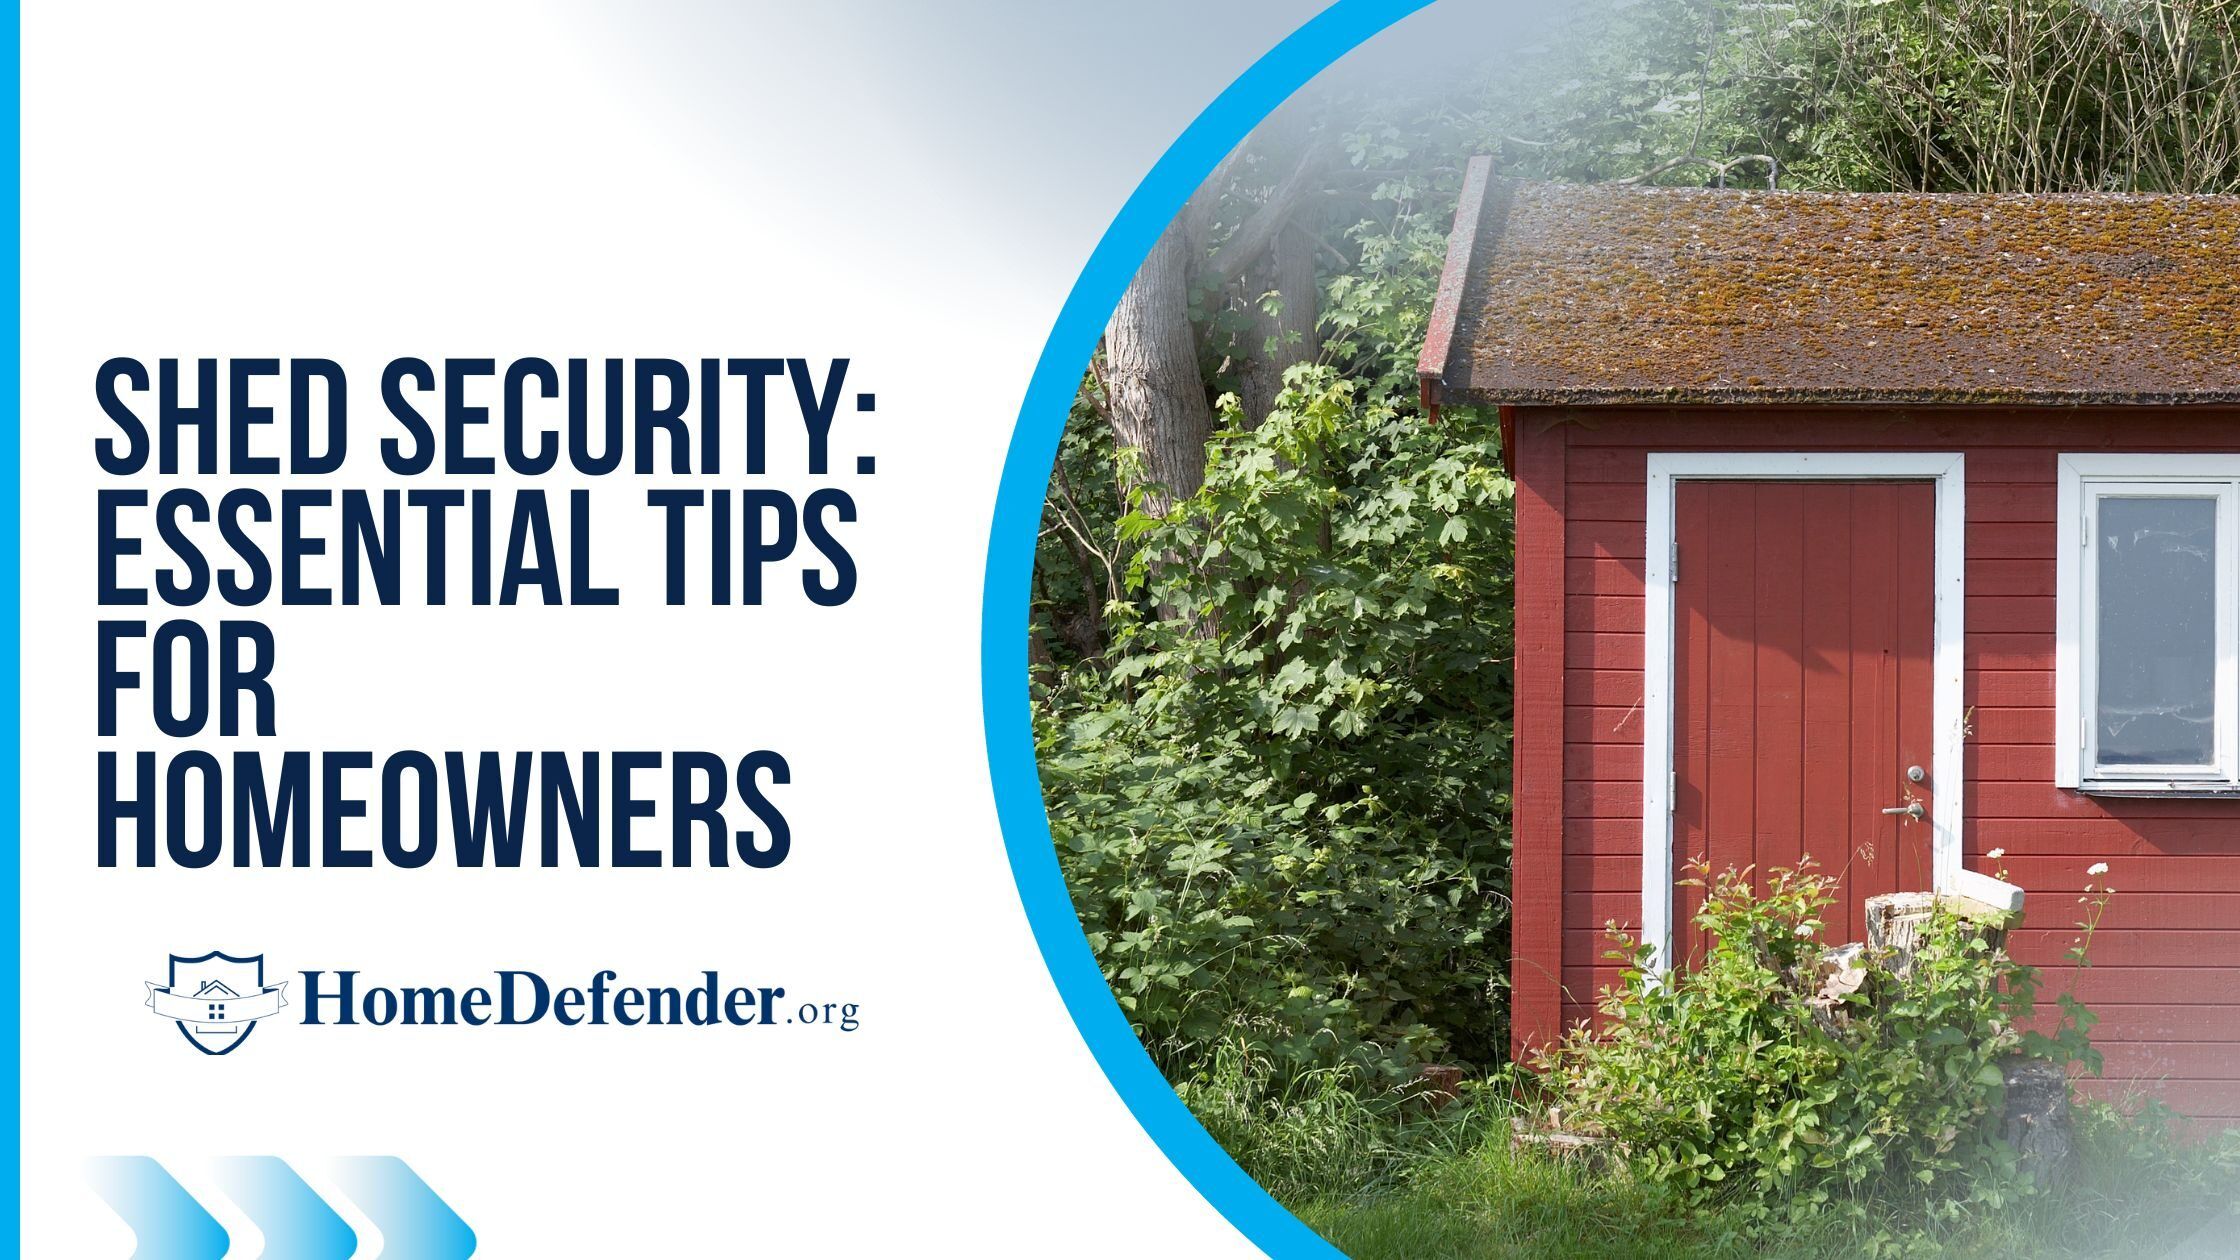 Shed Security: Essential Tips for Homeowners